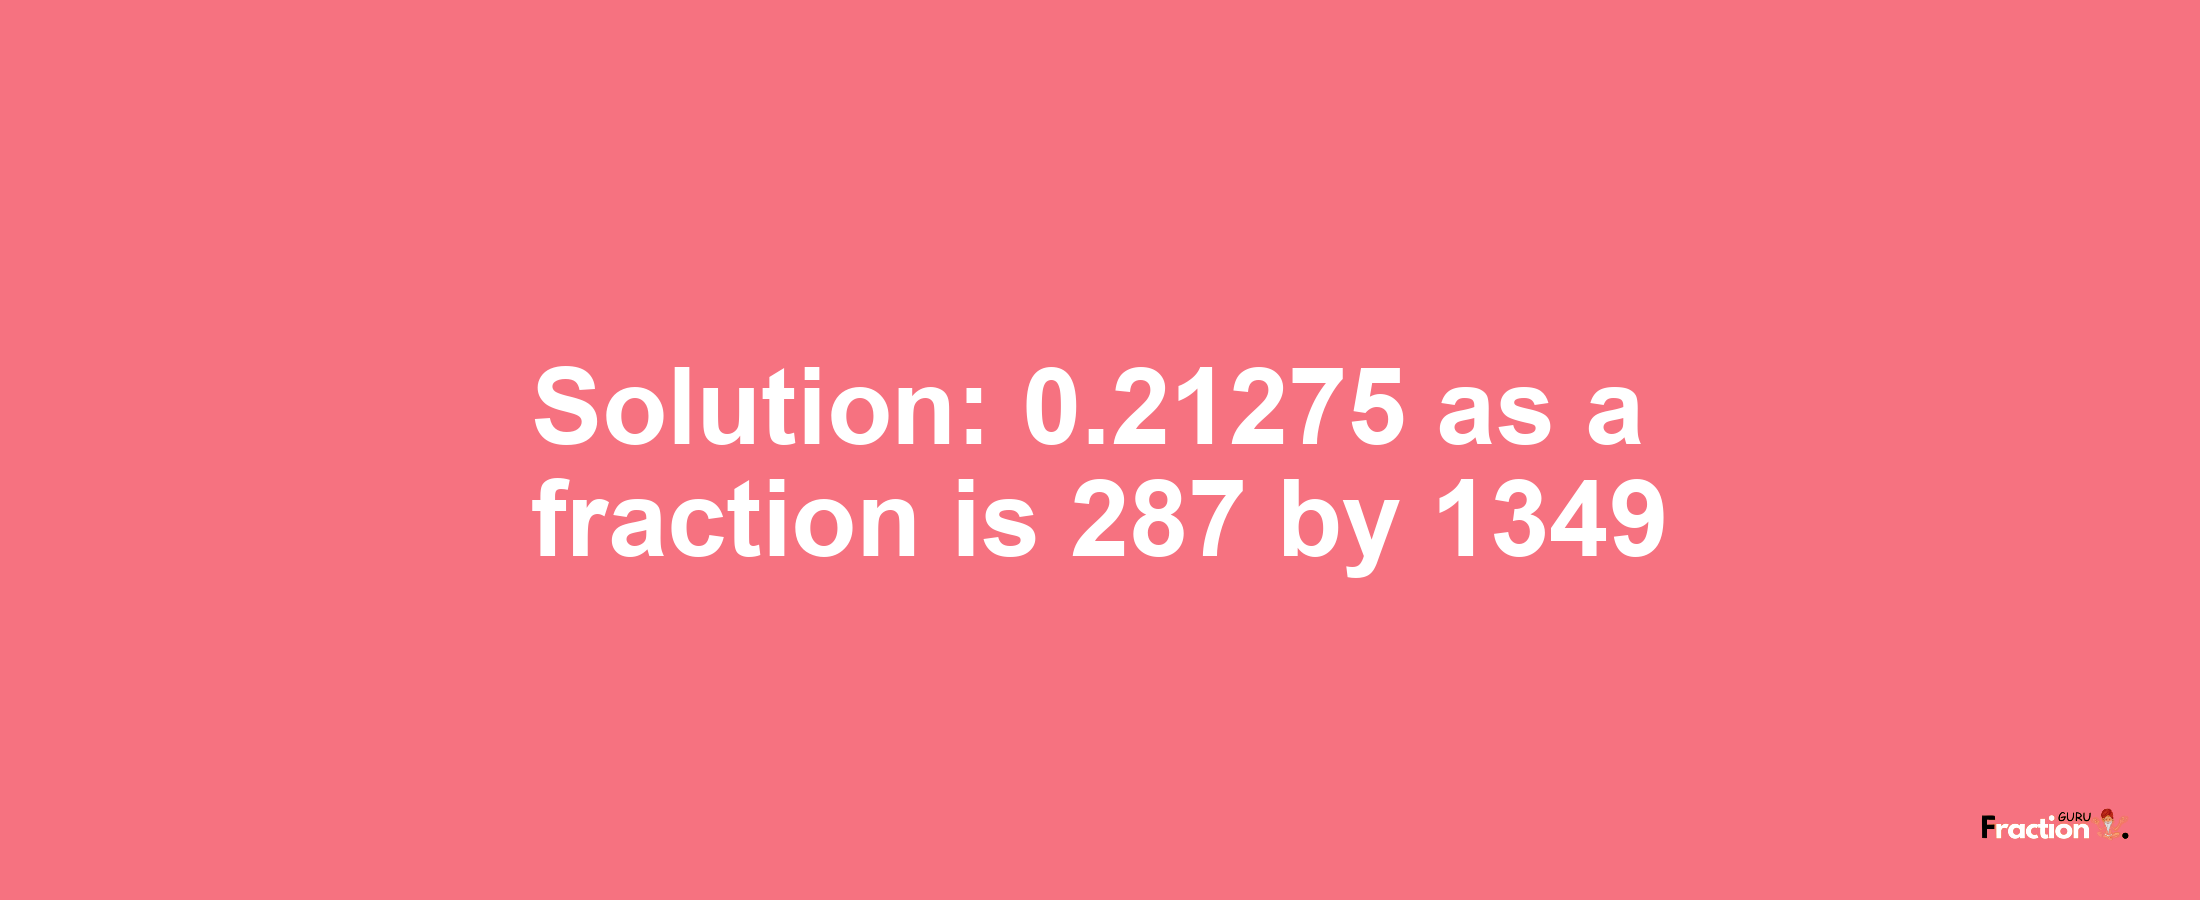 Solution:0.21275 as a fraction is 287/1349